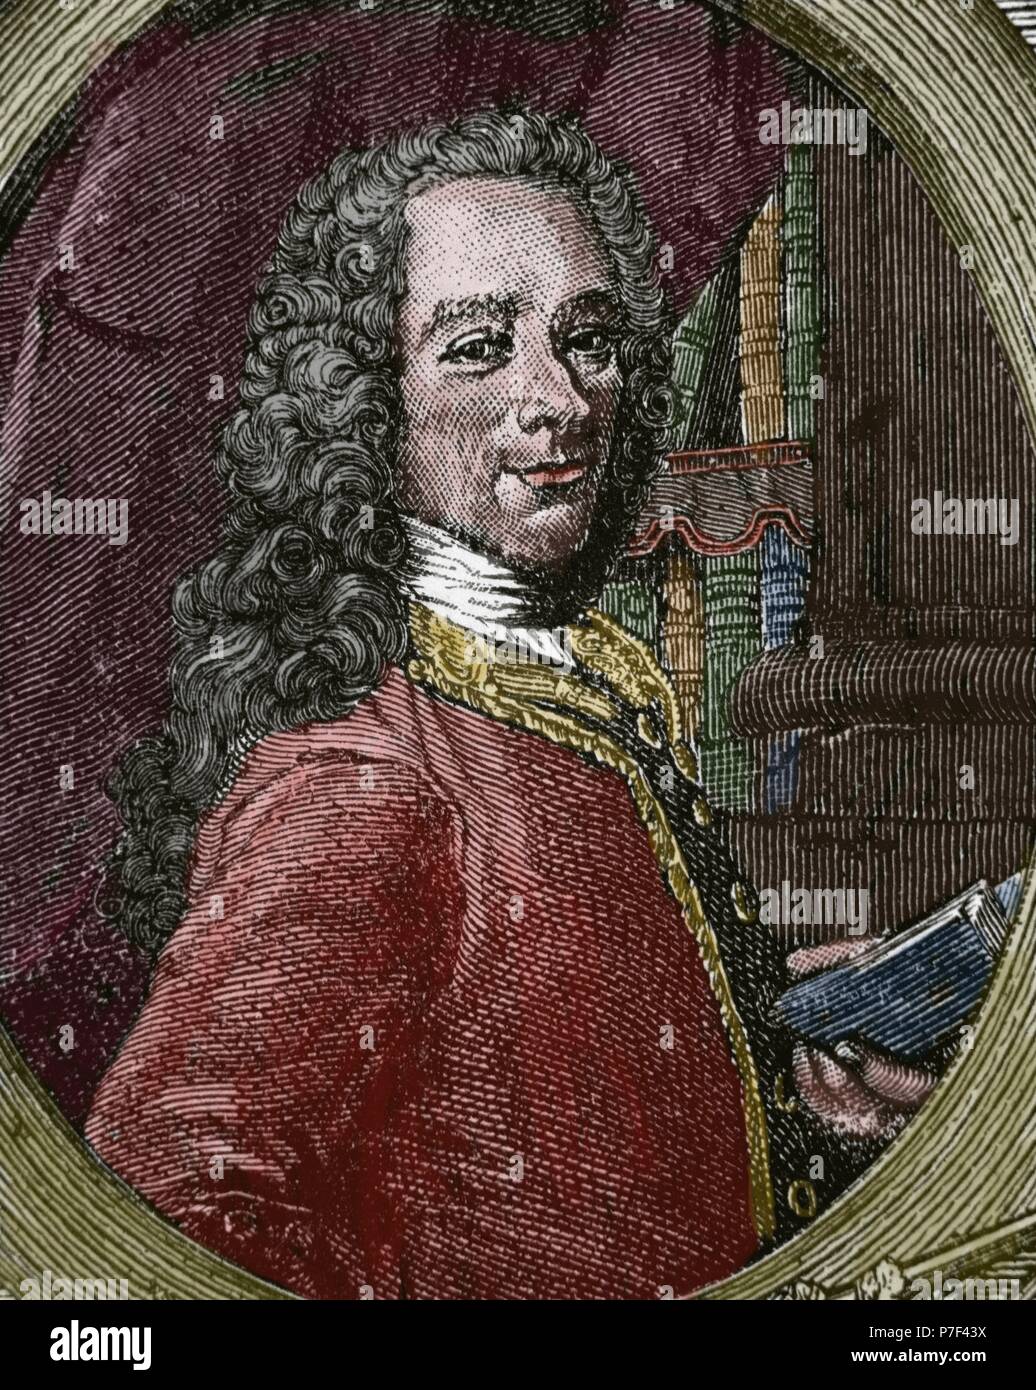 Voltaire (1694-1778). French Enlightenment writer, historian, and philosopher. Portrait. Engraving by Etienne Fiquet (1719-1797). Colored. Stock Photo